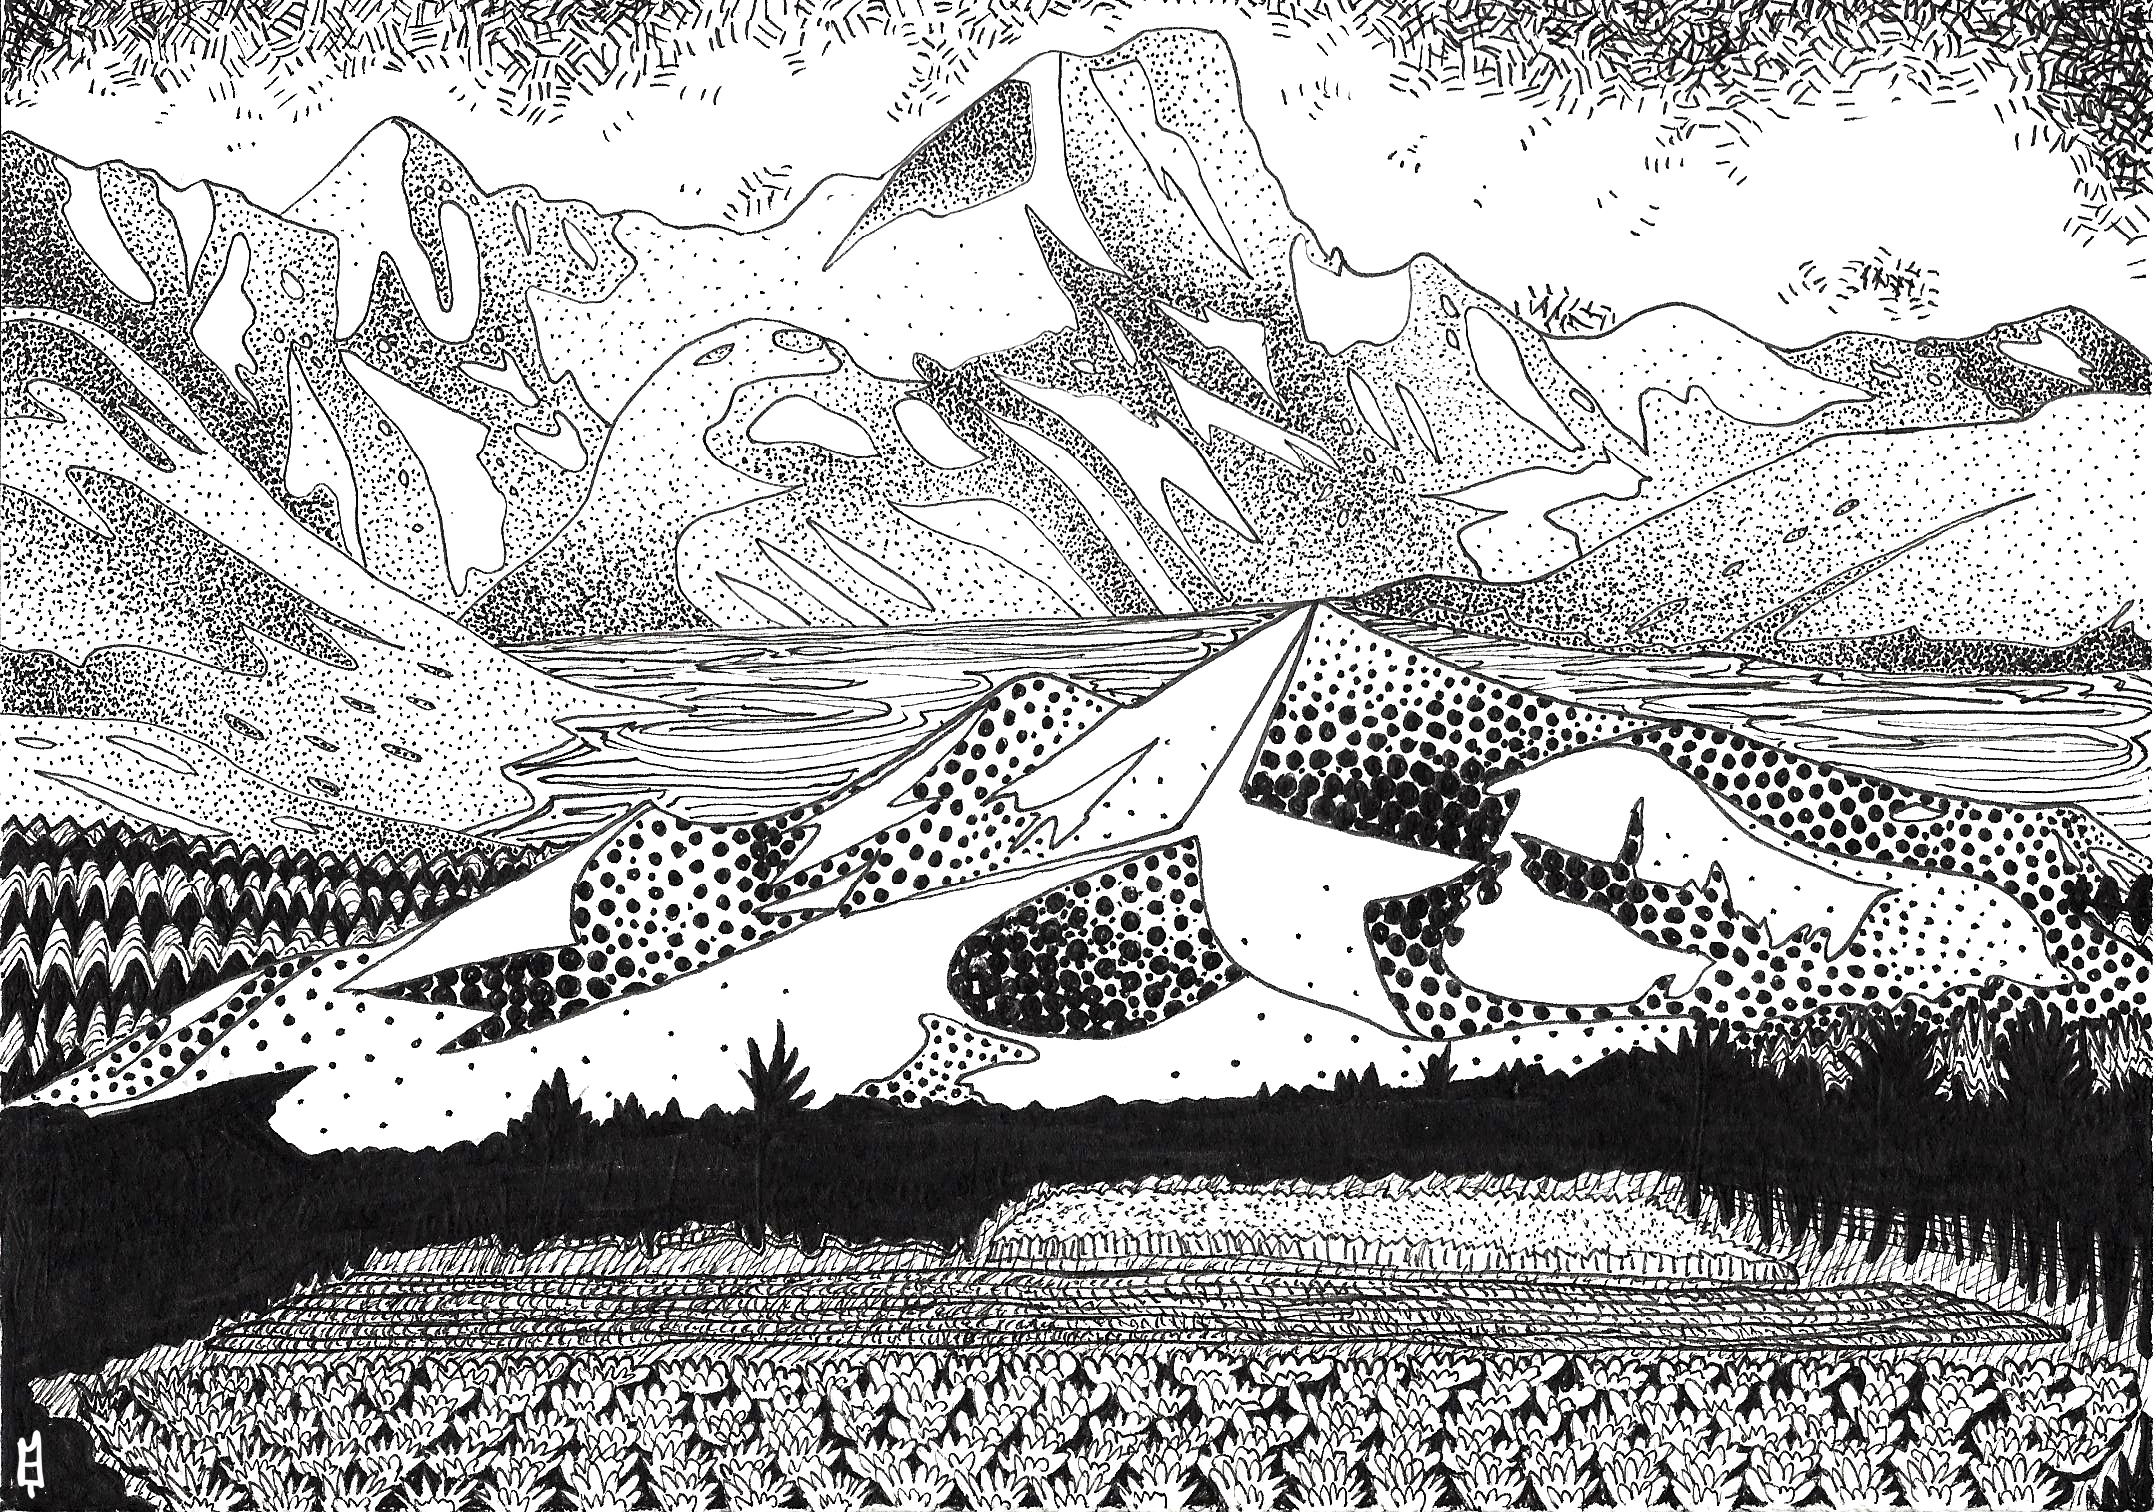 A black and white drawing of mountain ranges, one in the midground with large black patterning in the shadows, one in the background with small stipples. Water between the two ranges full of spiraling lines. Cross hatches in the sky around the blank shapes of clouds. A solid black tree line in front of the midground mountains, with a field of sketched crops in the foreground.